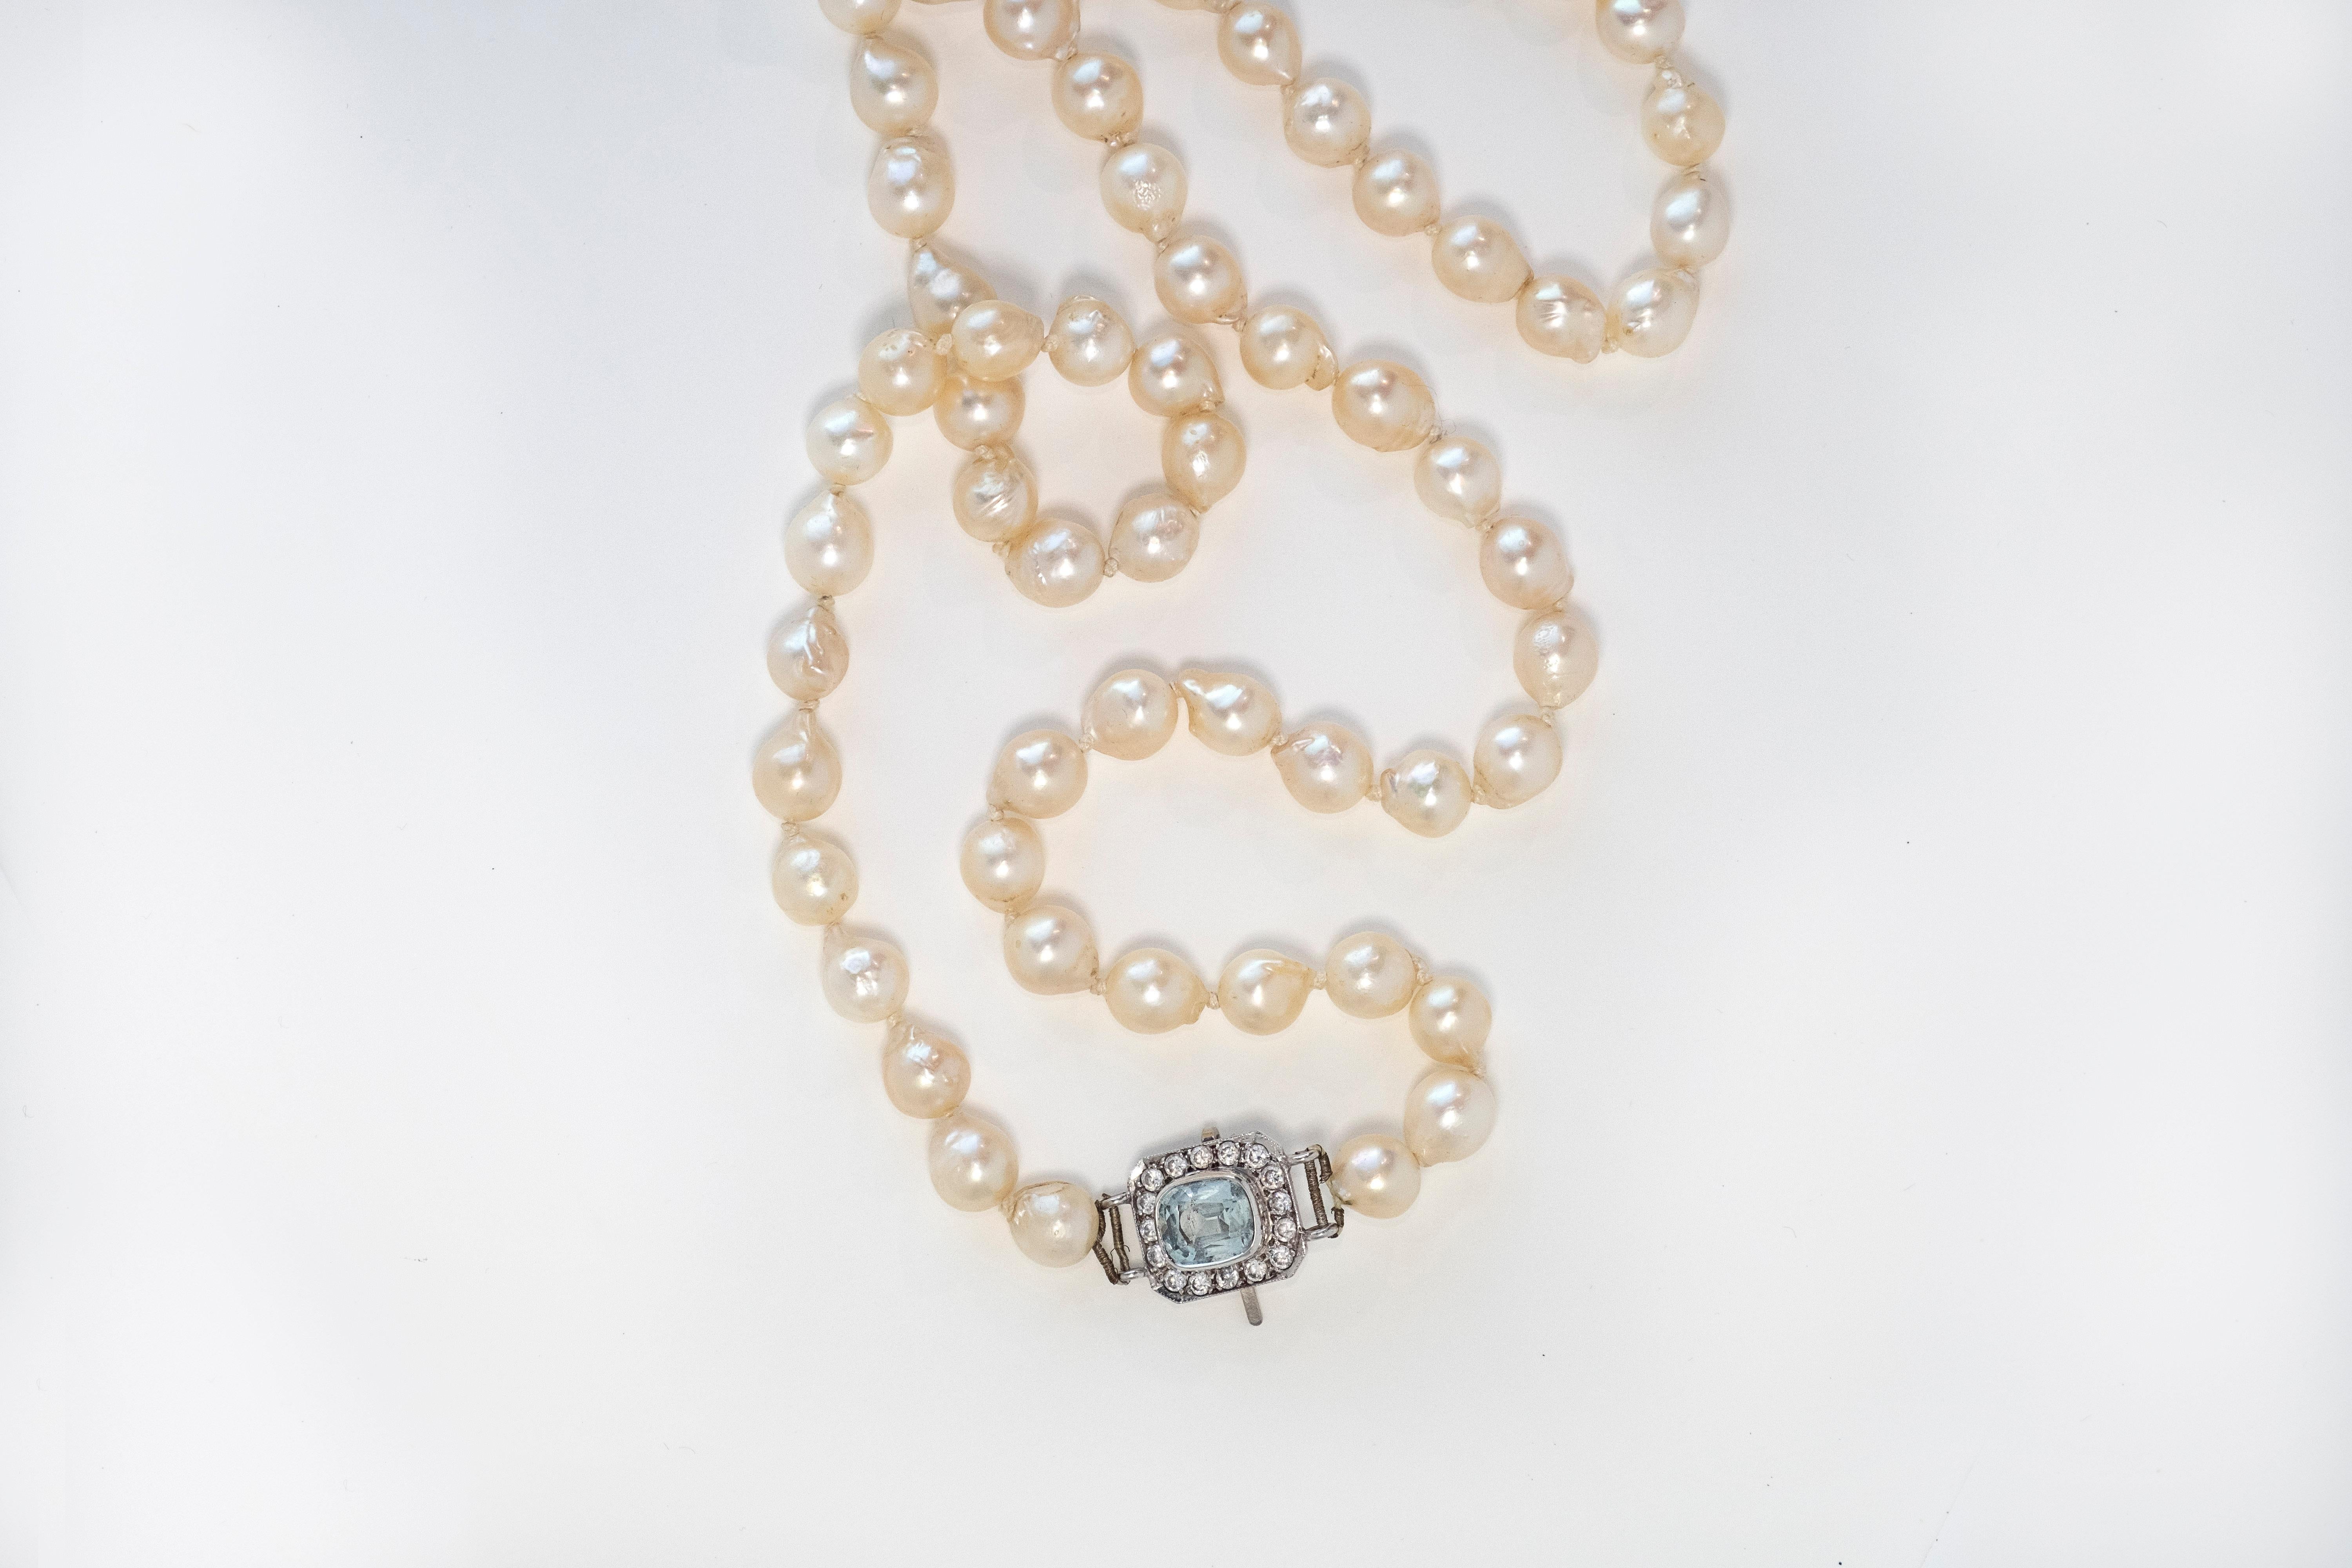 Said to offer protection, to attract good luck and prosperity to the wearer, Pearls also represent purity, integrity, and wisdom gained through experience. Matched with Aquamarine, which is associated with tranquility, serenity, clarity, and